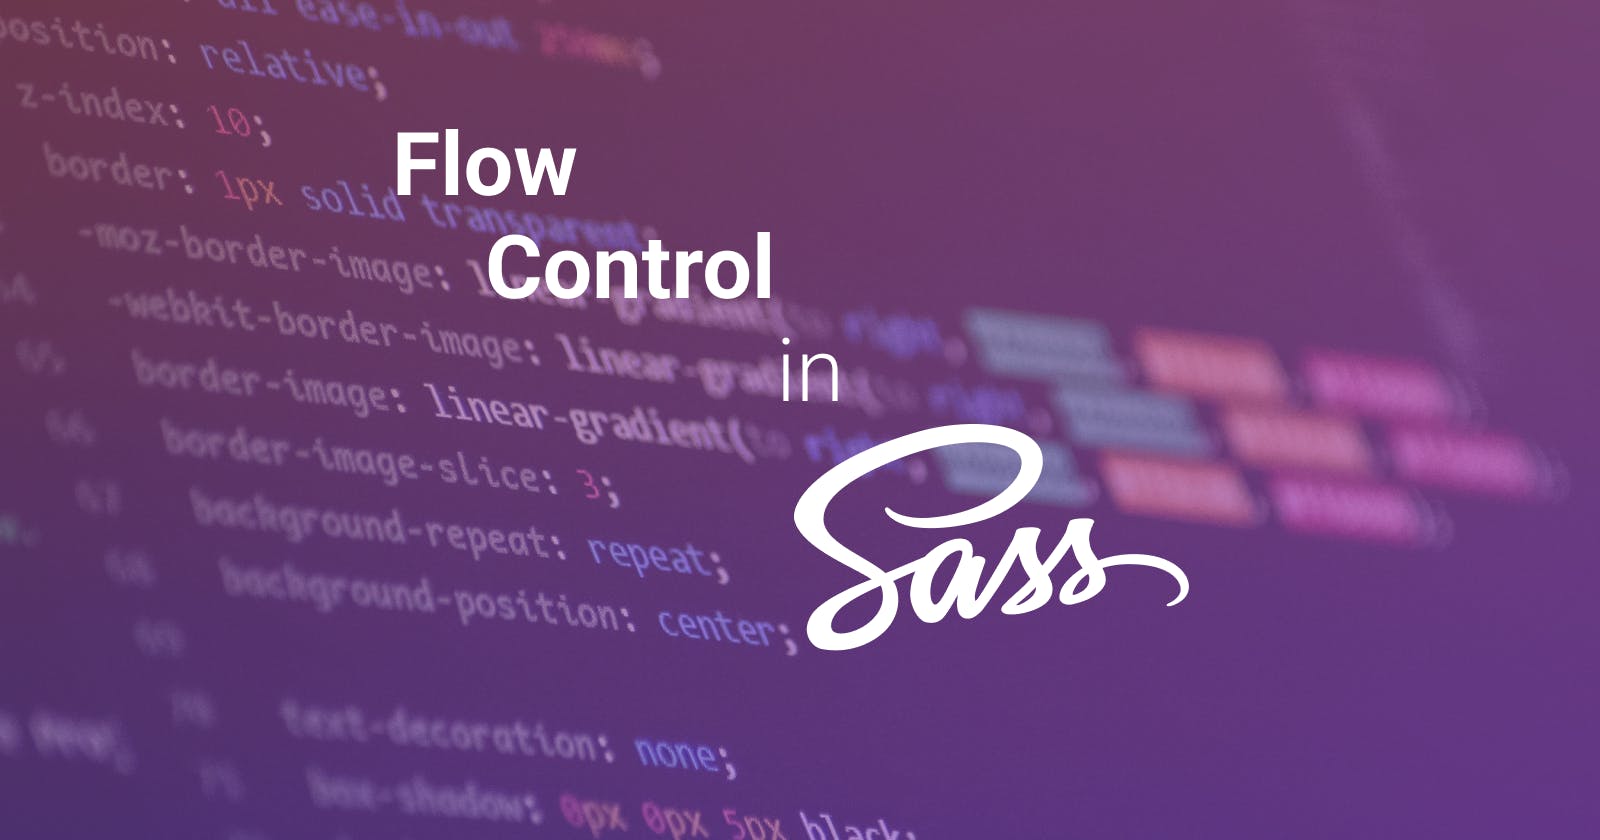 Flow control in SASS